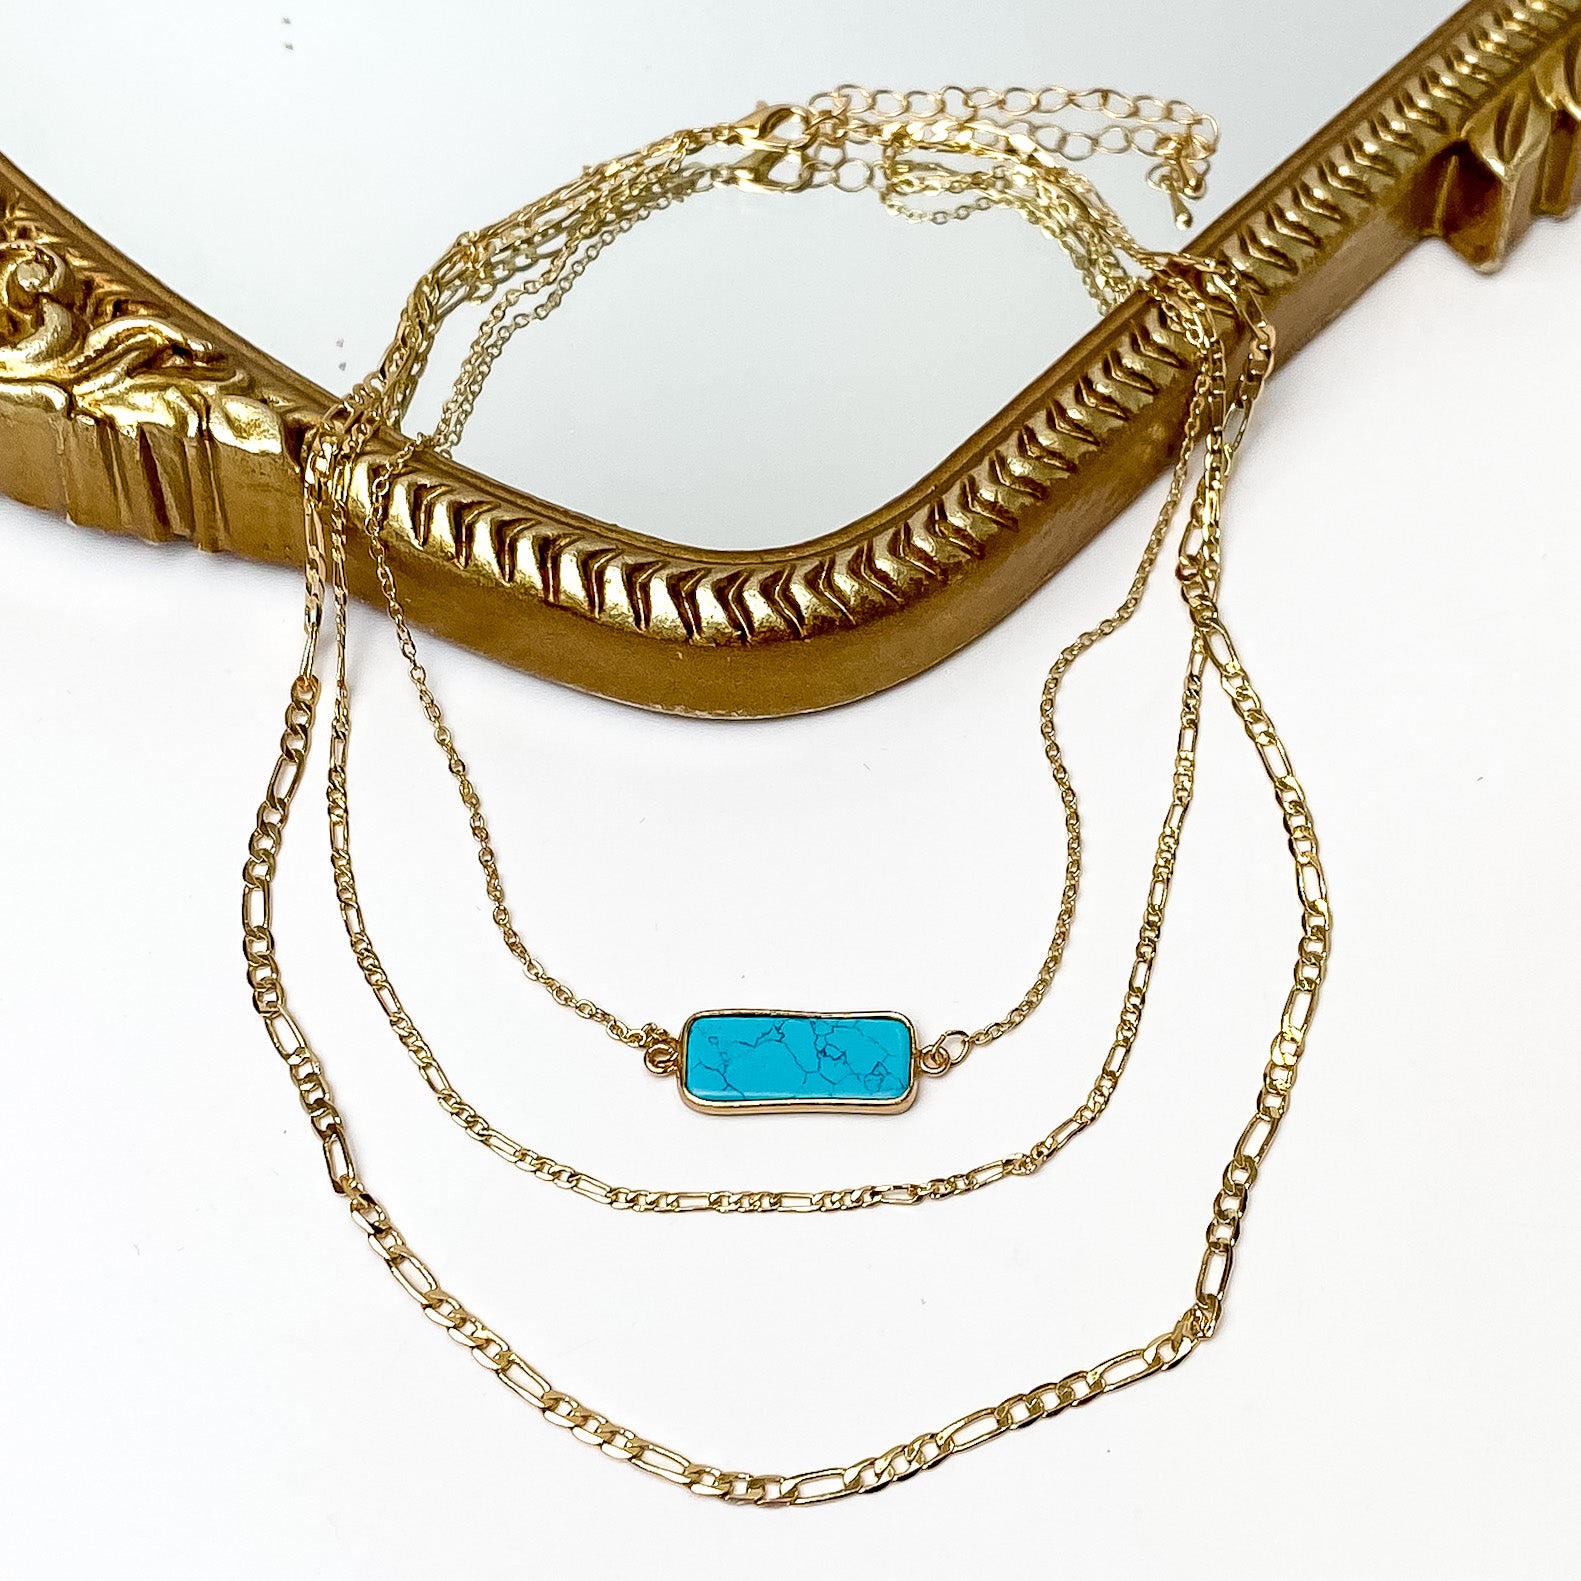 Turquoise Stone Pendant Gold Tone Chain Three layered Necklace - Giddy Up Glamour Boutique